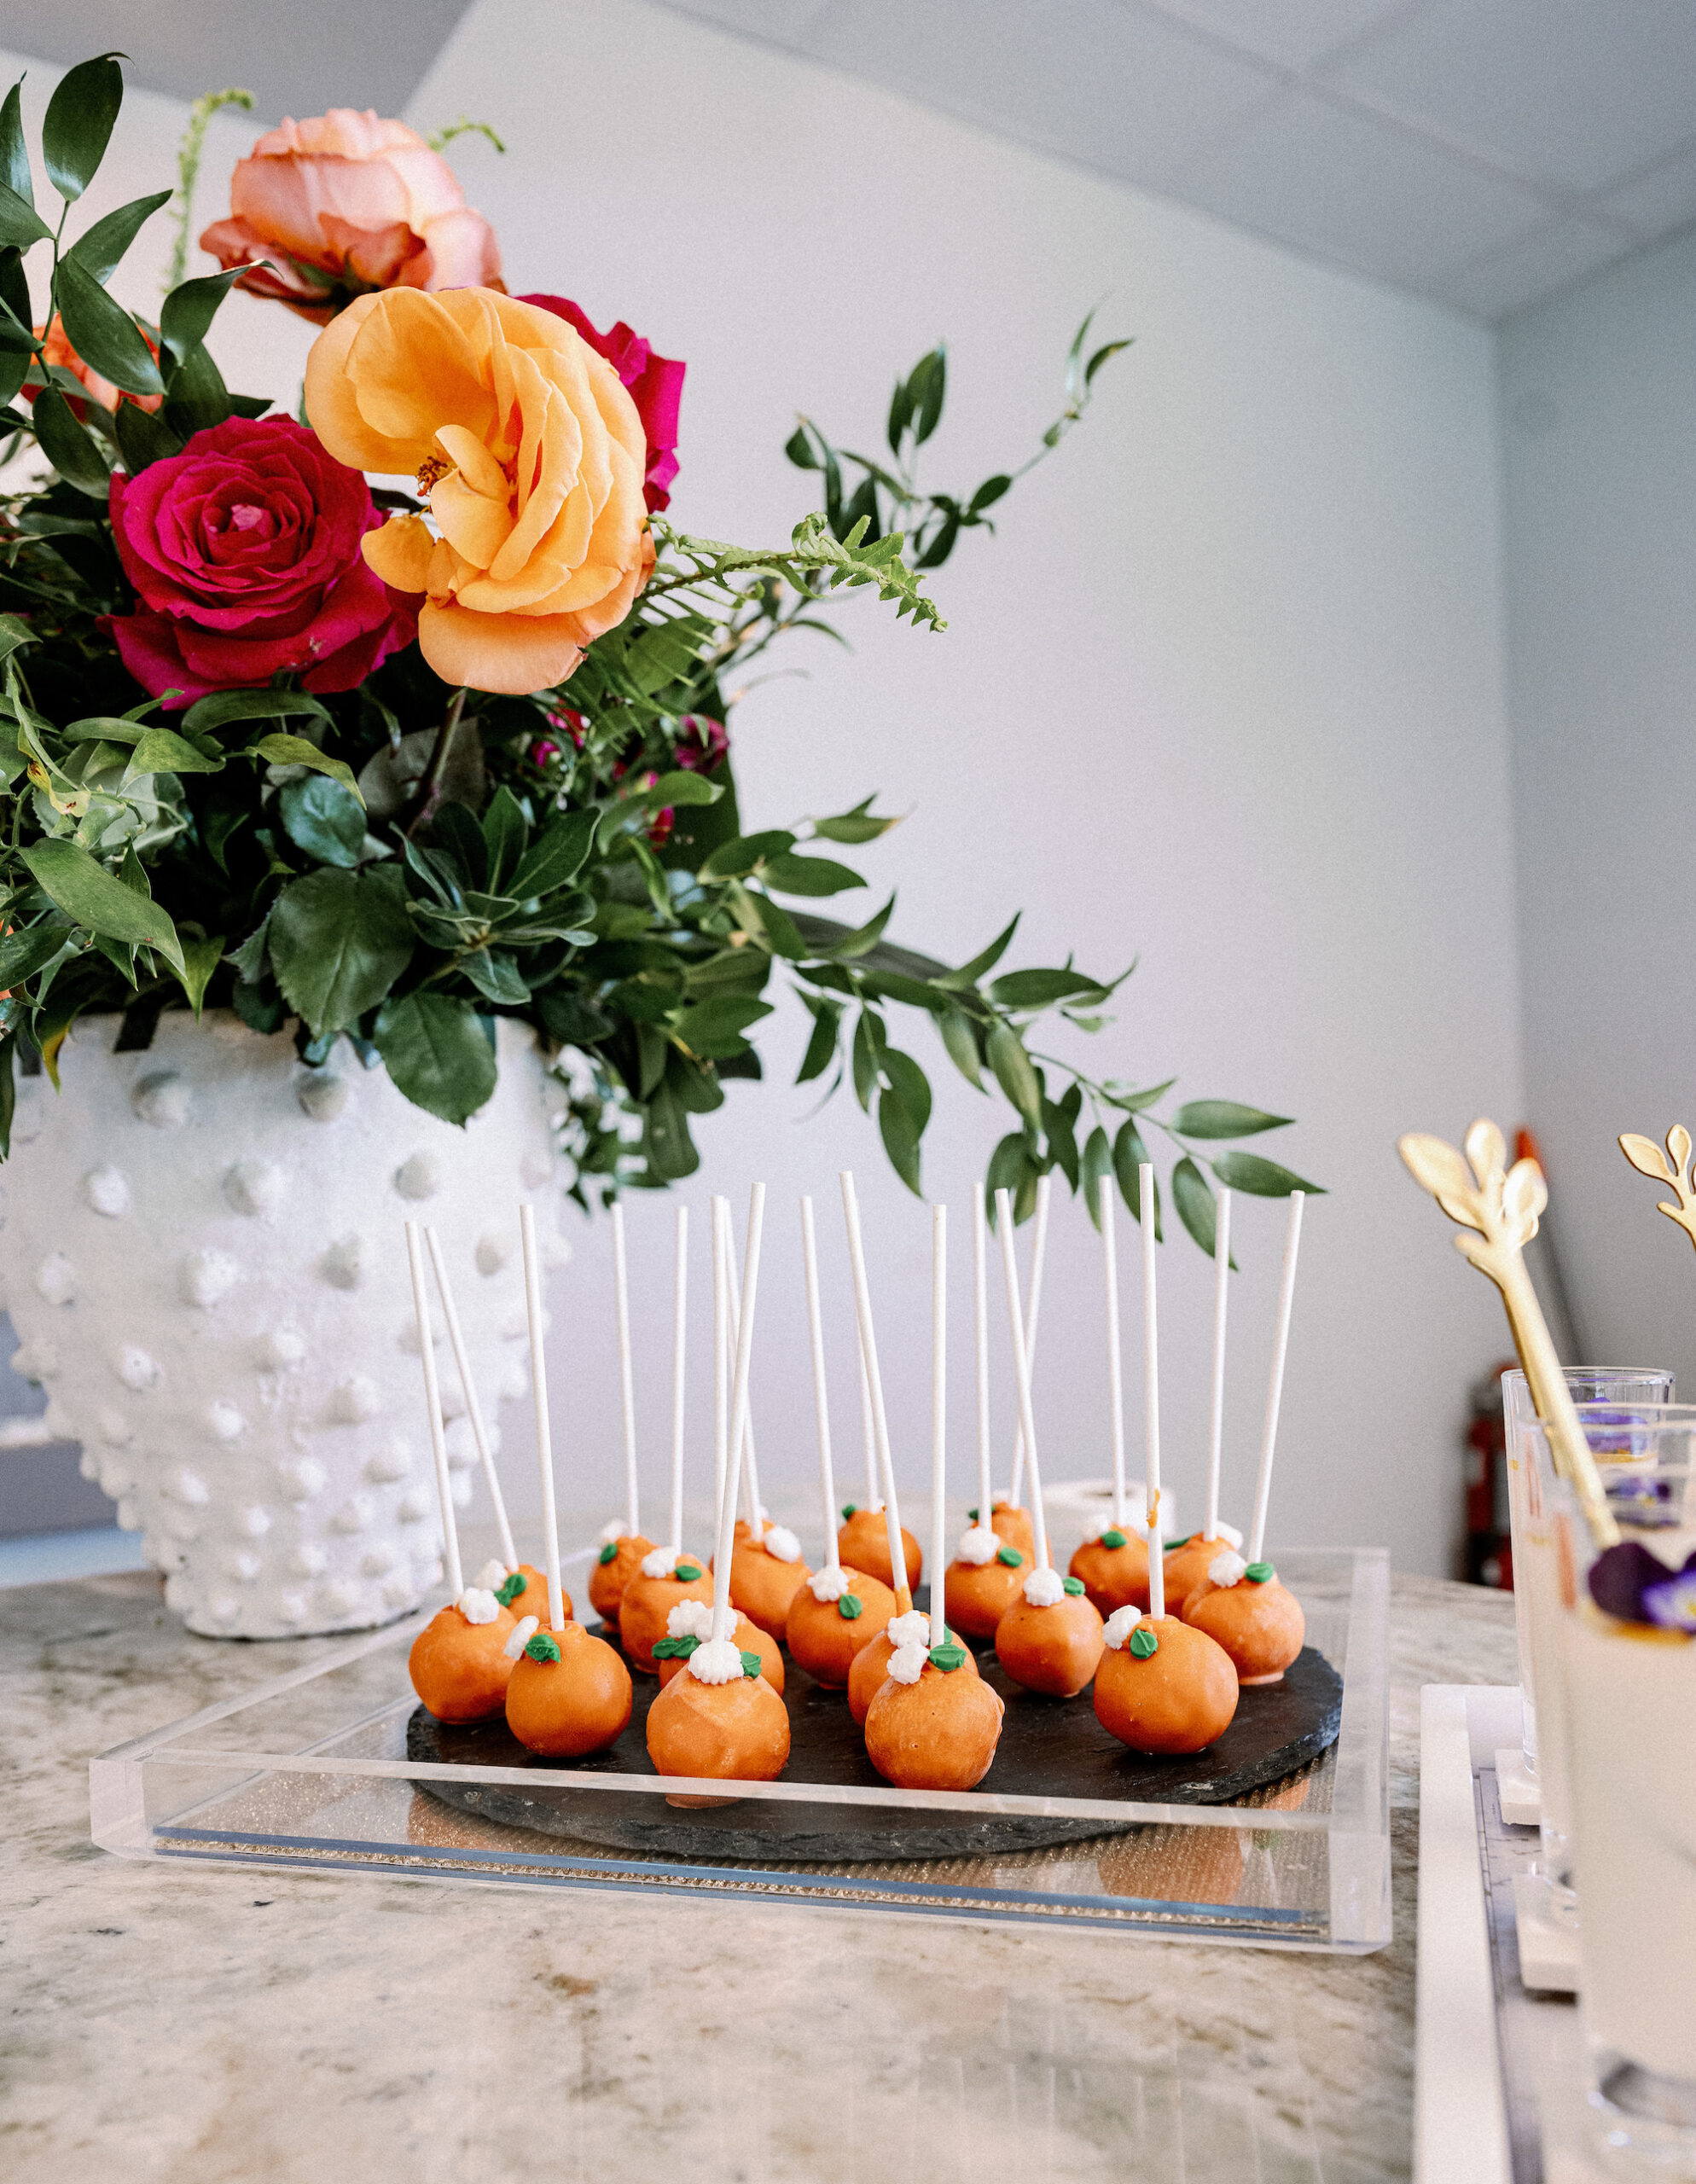 Tampa Bay Catering Company Elite Events Catering | Dewitt for Love Photography | Orange Cake Pops